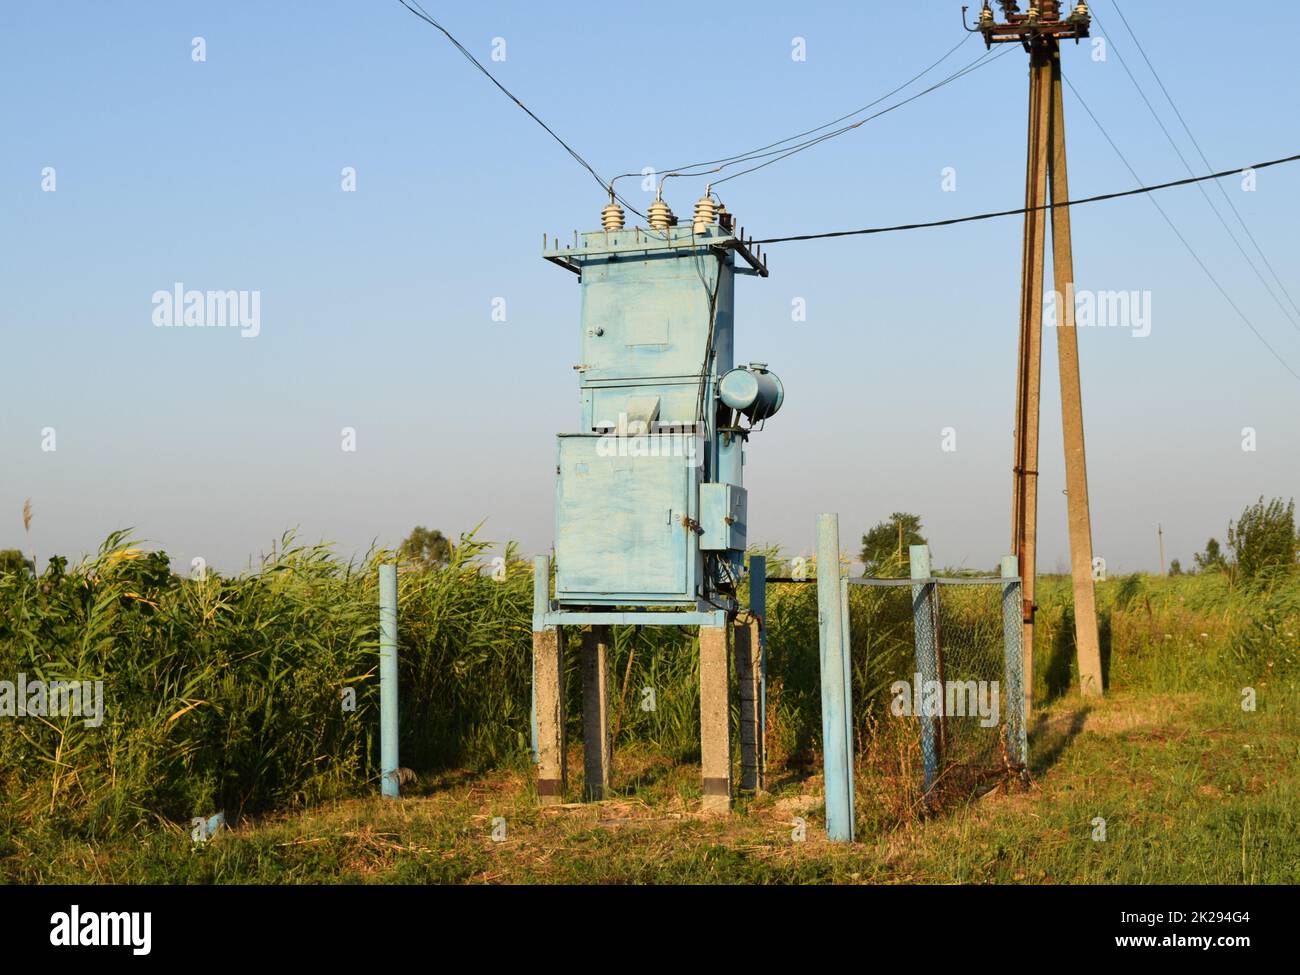 Transformers for voltage conversion. Power infrastructure. The old equipment Stock Photo